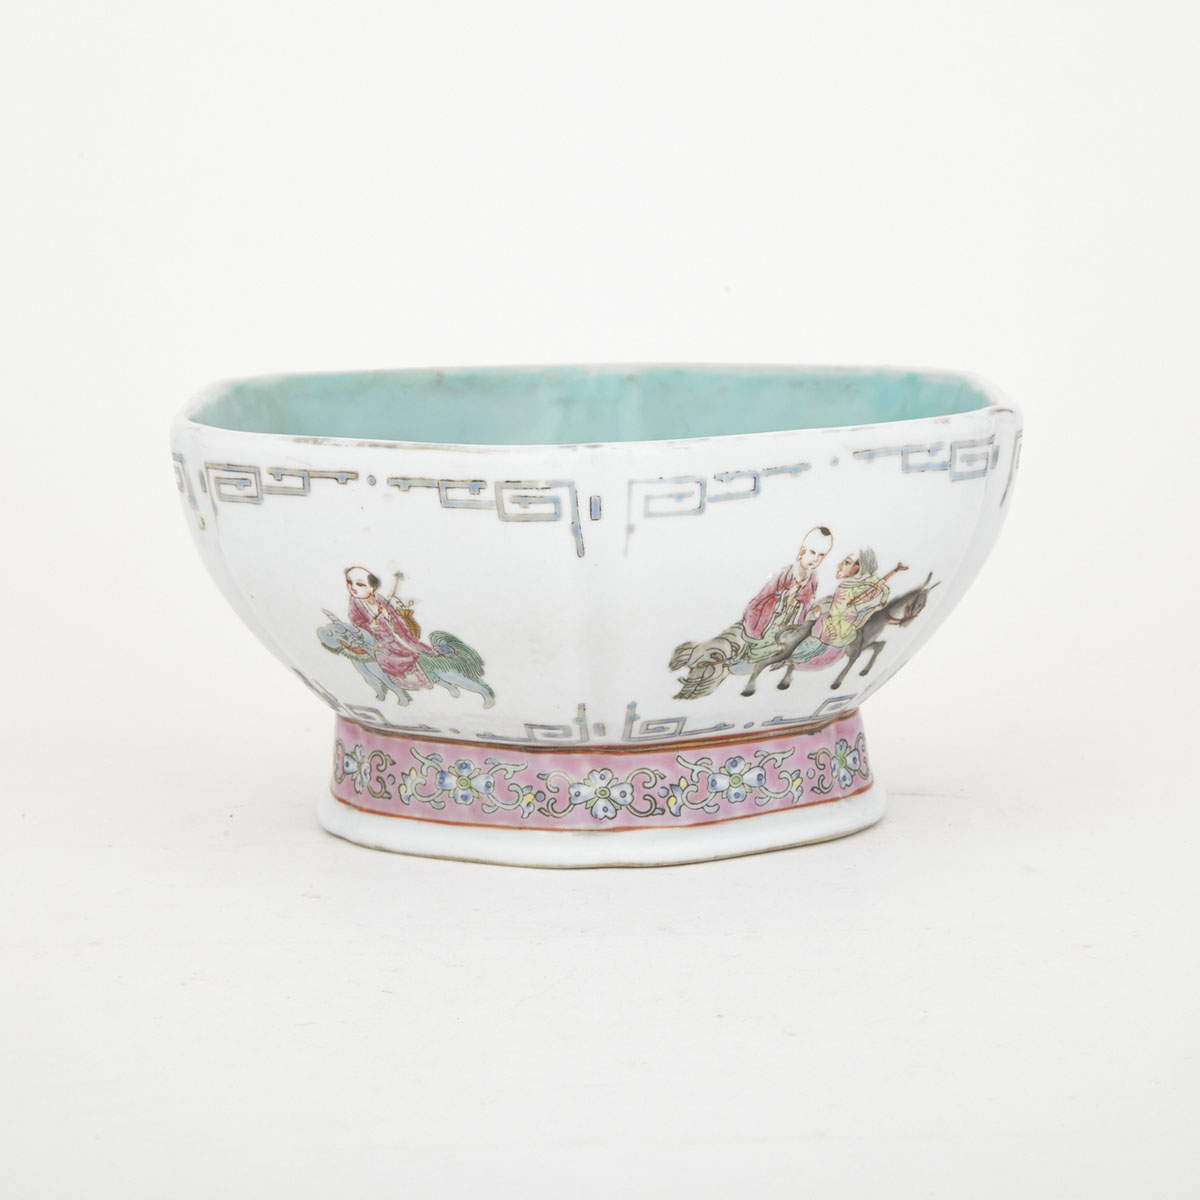 Eight Immortals Bowl, Early 20th Century